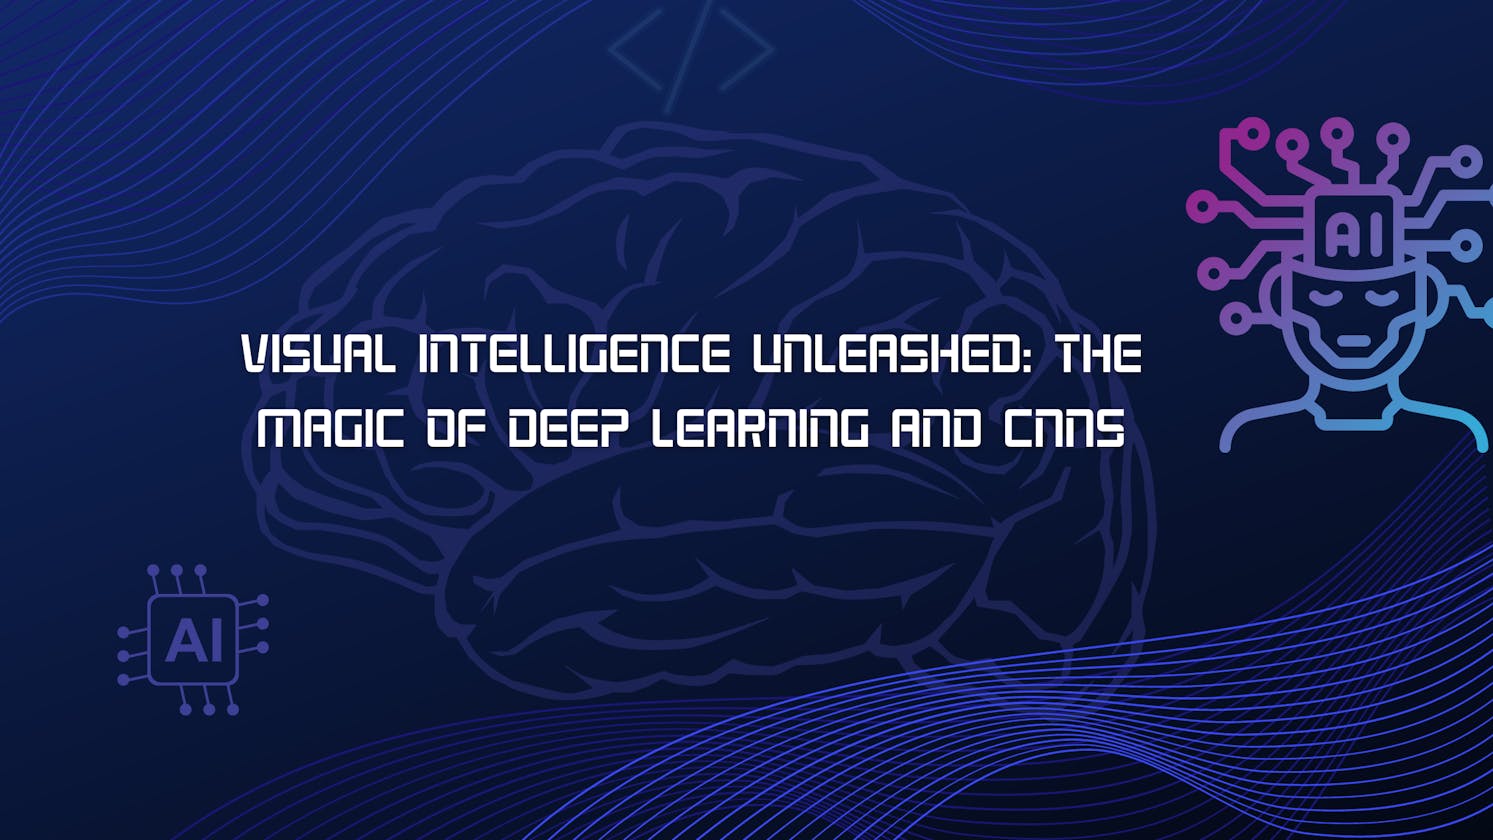 Visual Intelligence Unleashed: The Magic of Deep Learning and CNNs